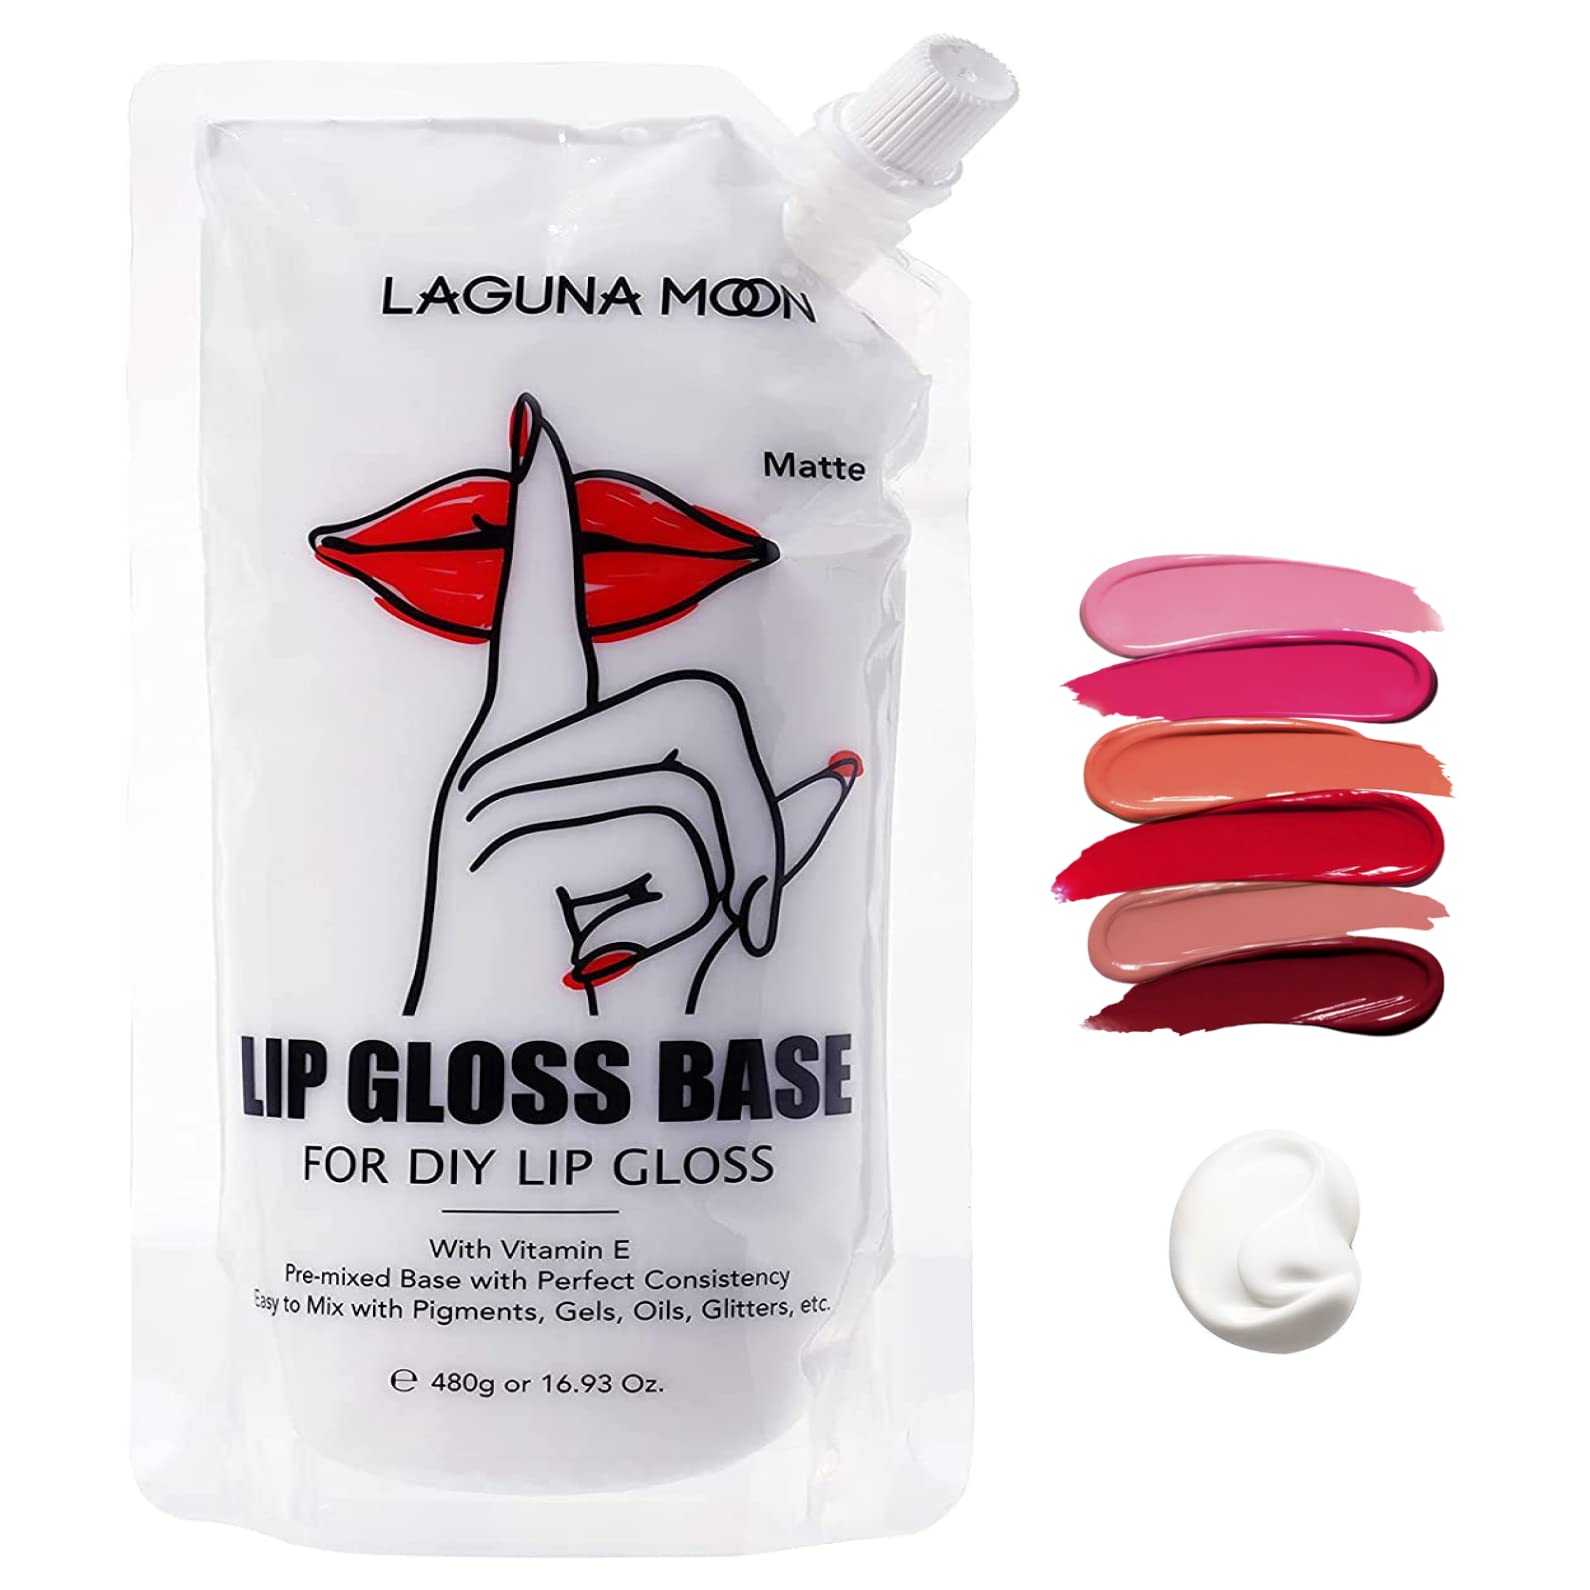 Matte Lip Gloss Base for DIY Lip Gloss Making Kit - 16.93oz Versagel with  Vitamin E for Smooth, Hydrated & Moisturized Lips - Fragrance Free, Safe  for Sensitive Skin - Supplies for